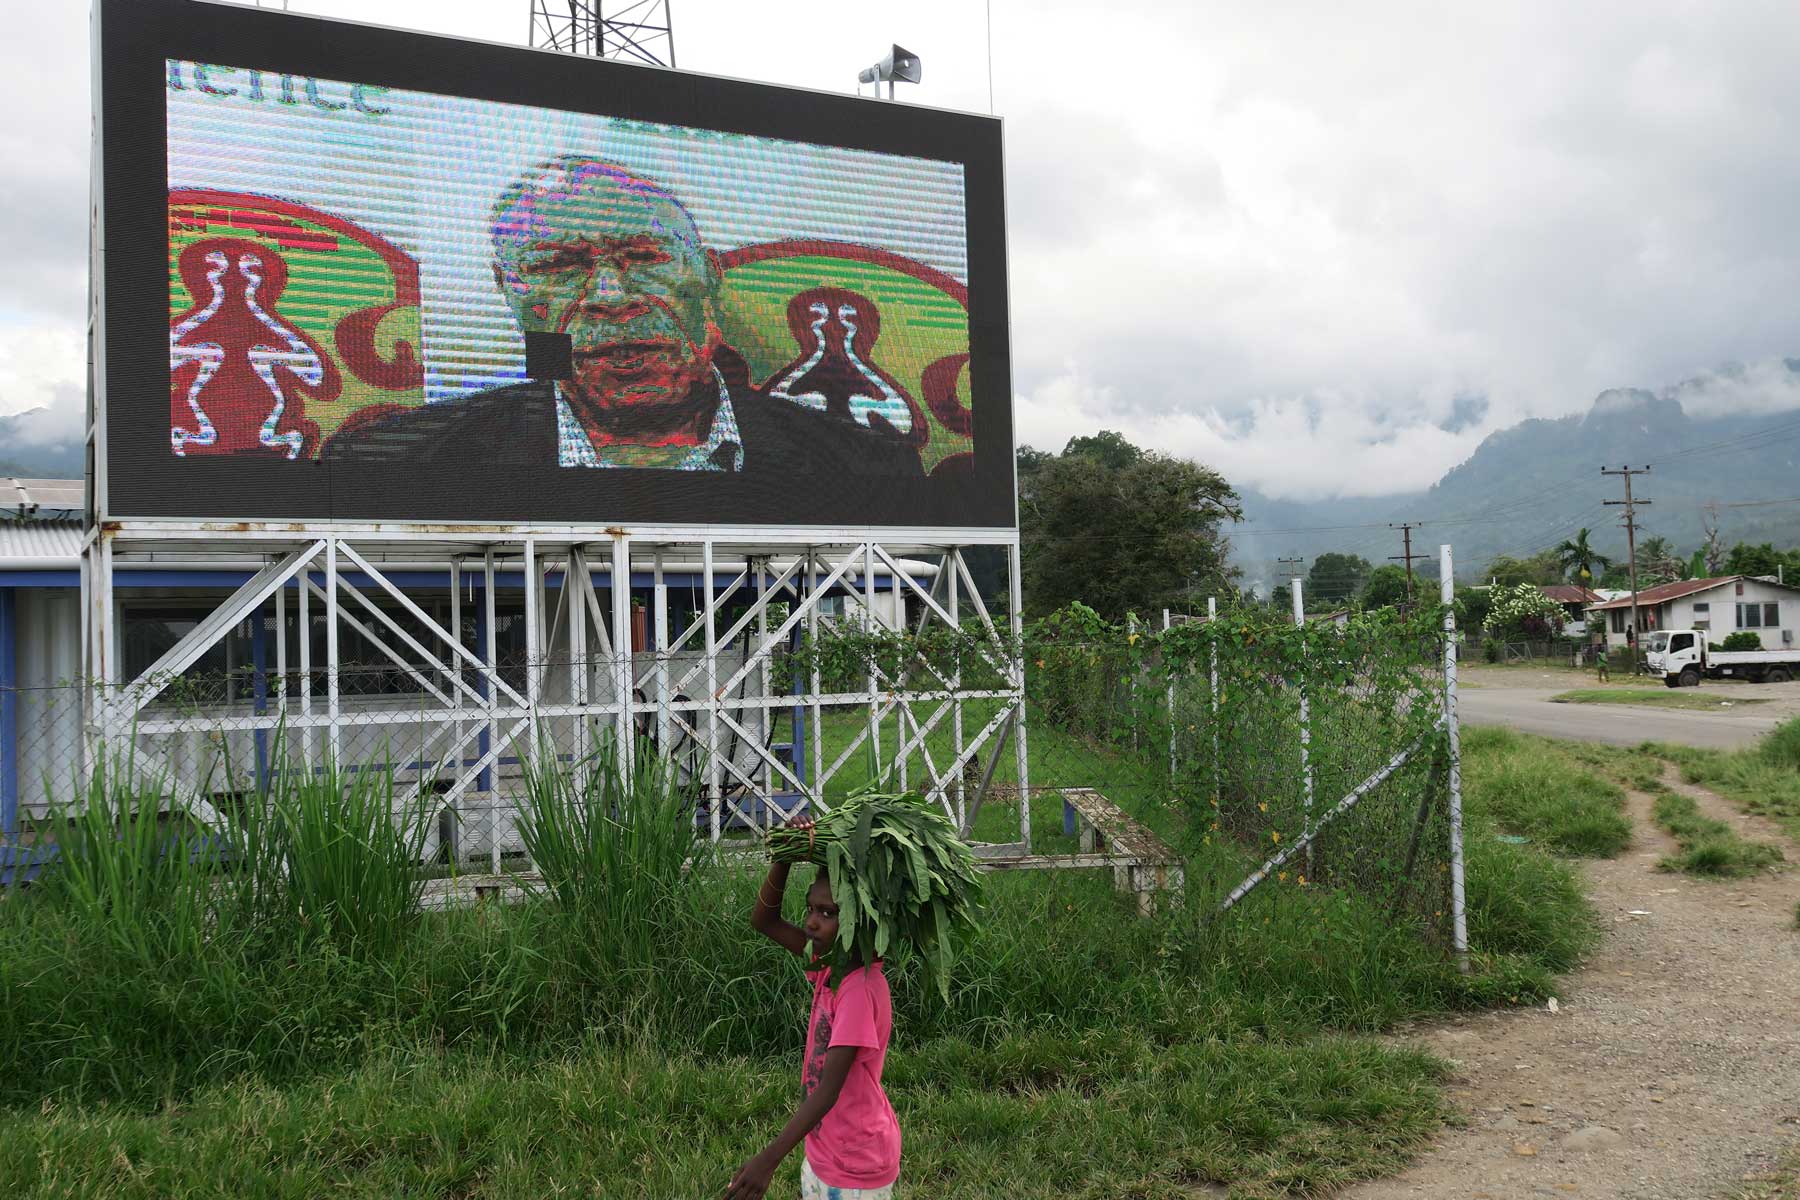 A television screen outside the market in Arawa is used to communicate updates on the referendum process (Photo: Ben Bohane/Wakaphotos.com)